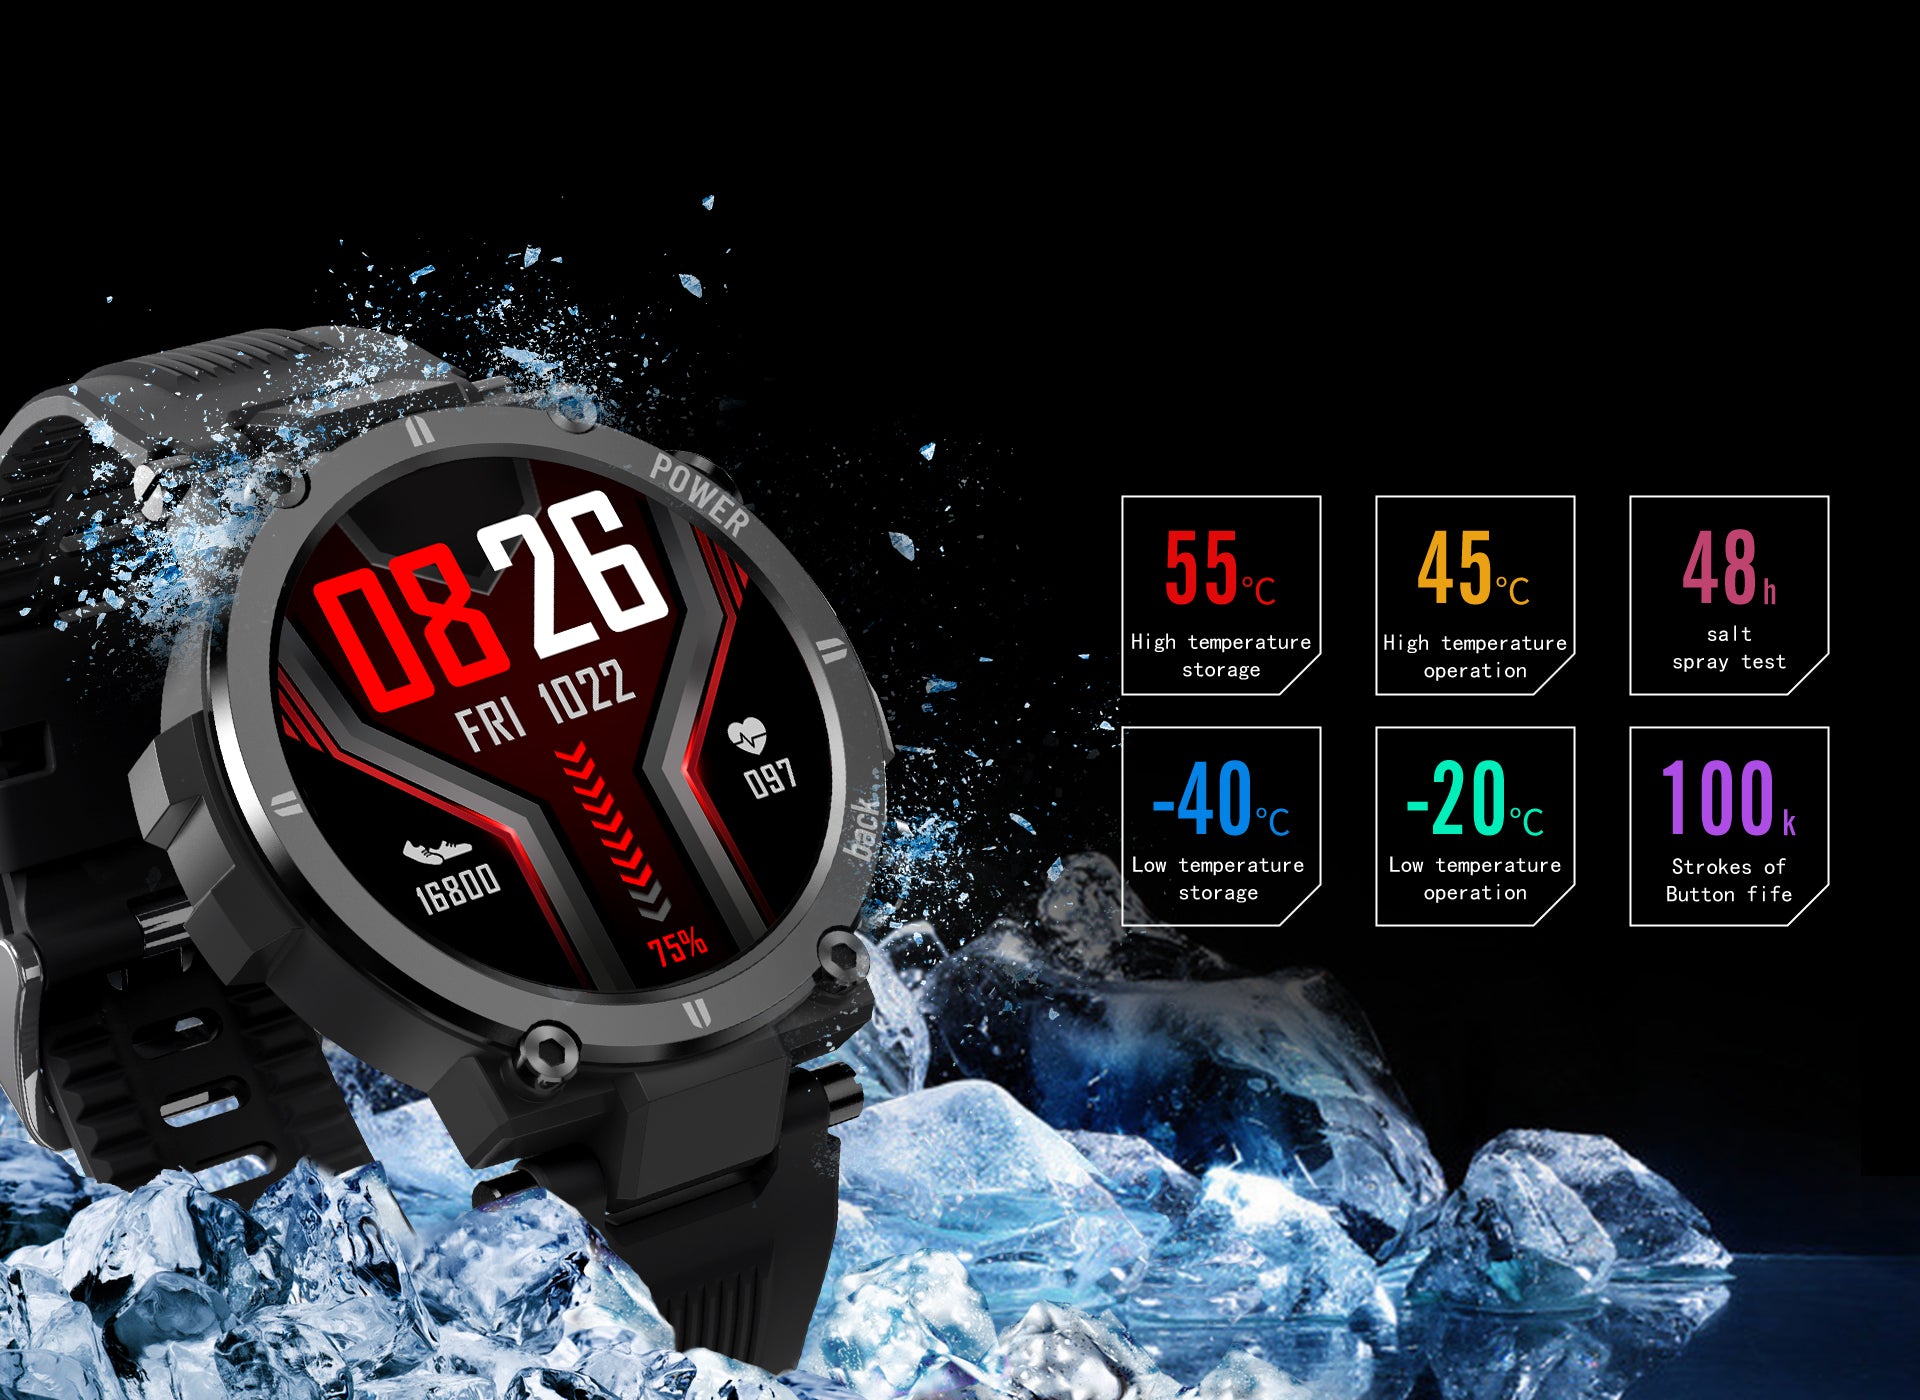 KOSPET Raptor Smartwatch Up to the military grade quality, passed extreme environment tests